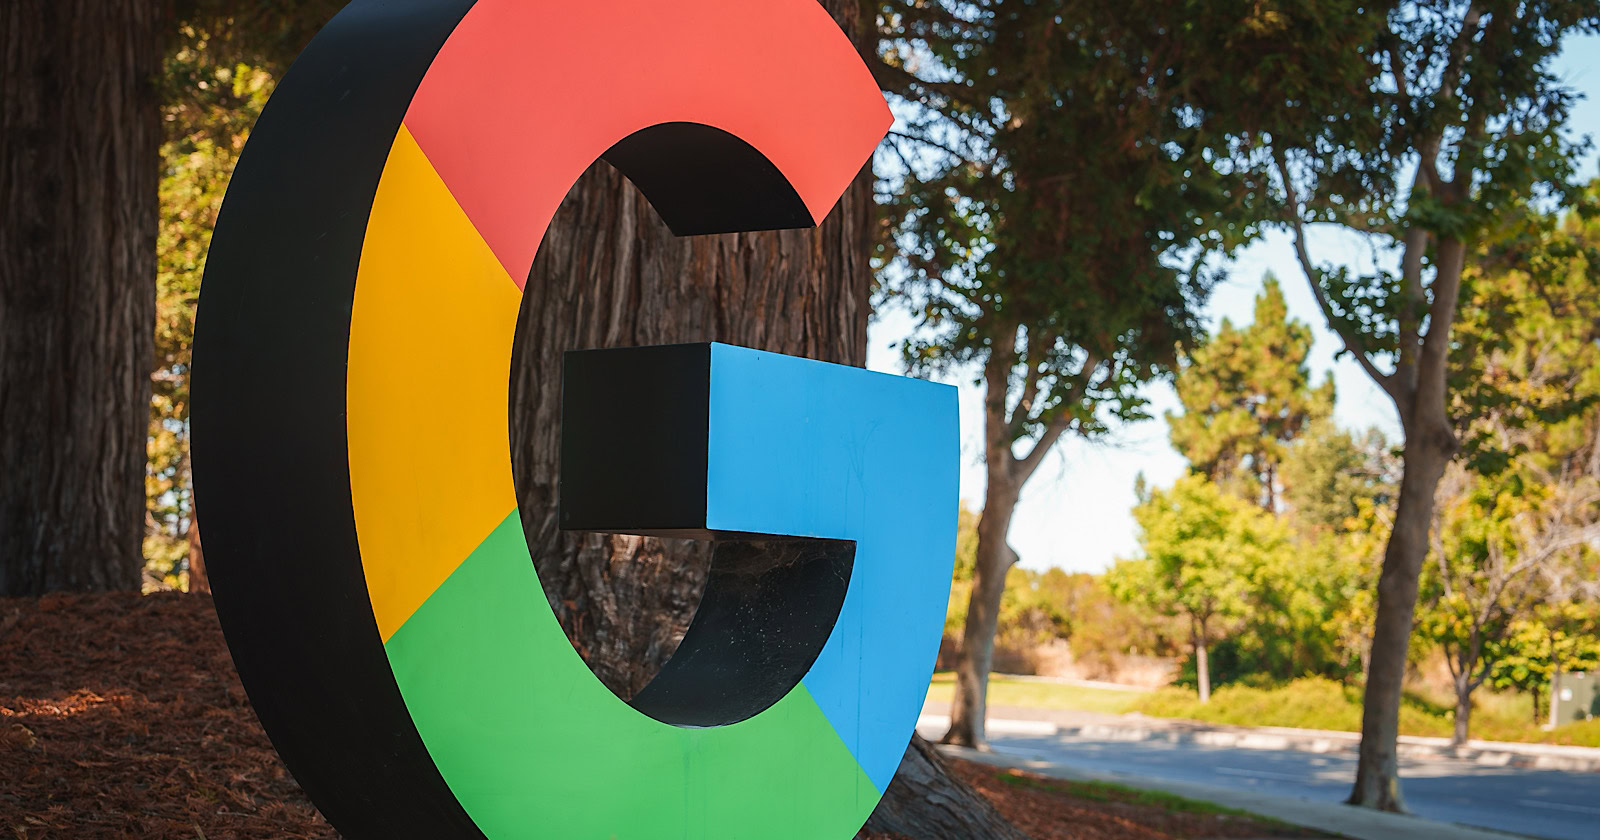 D letter 'G' resembling Google logo colors outdoors in a park like setting. No specific location provided, possibly near Google office or campus.